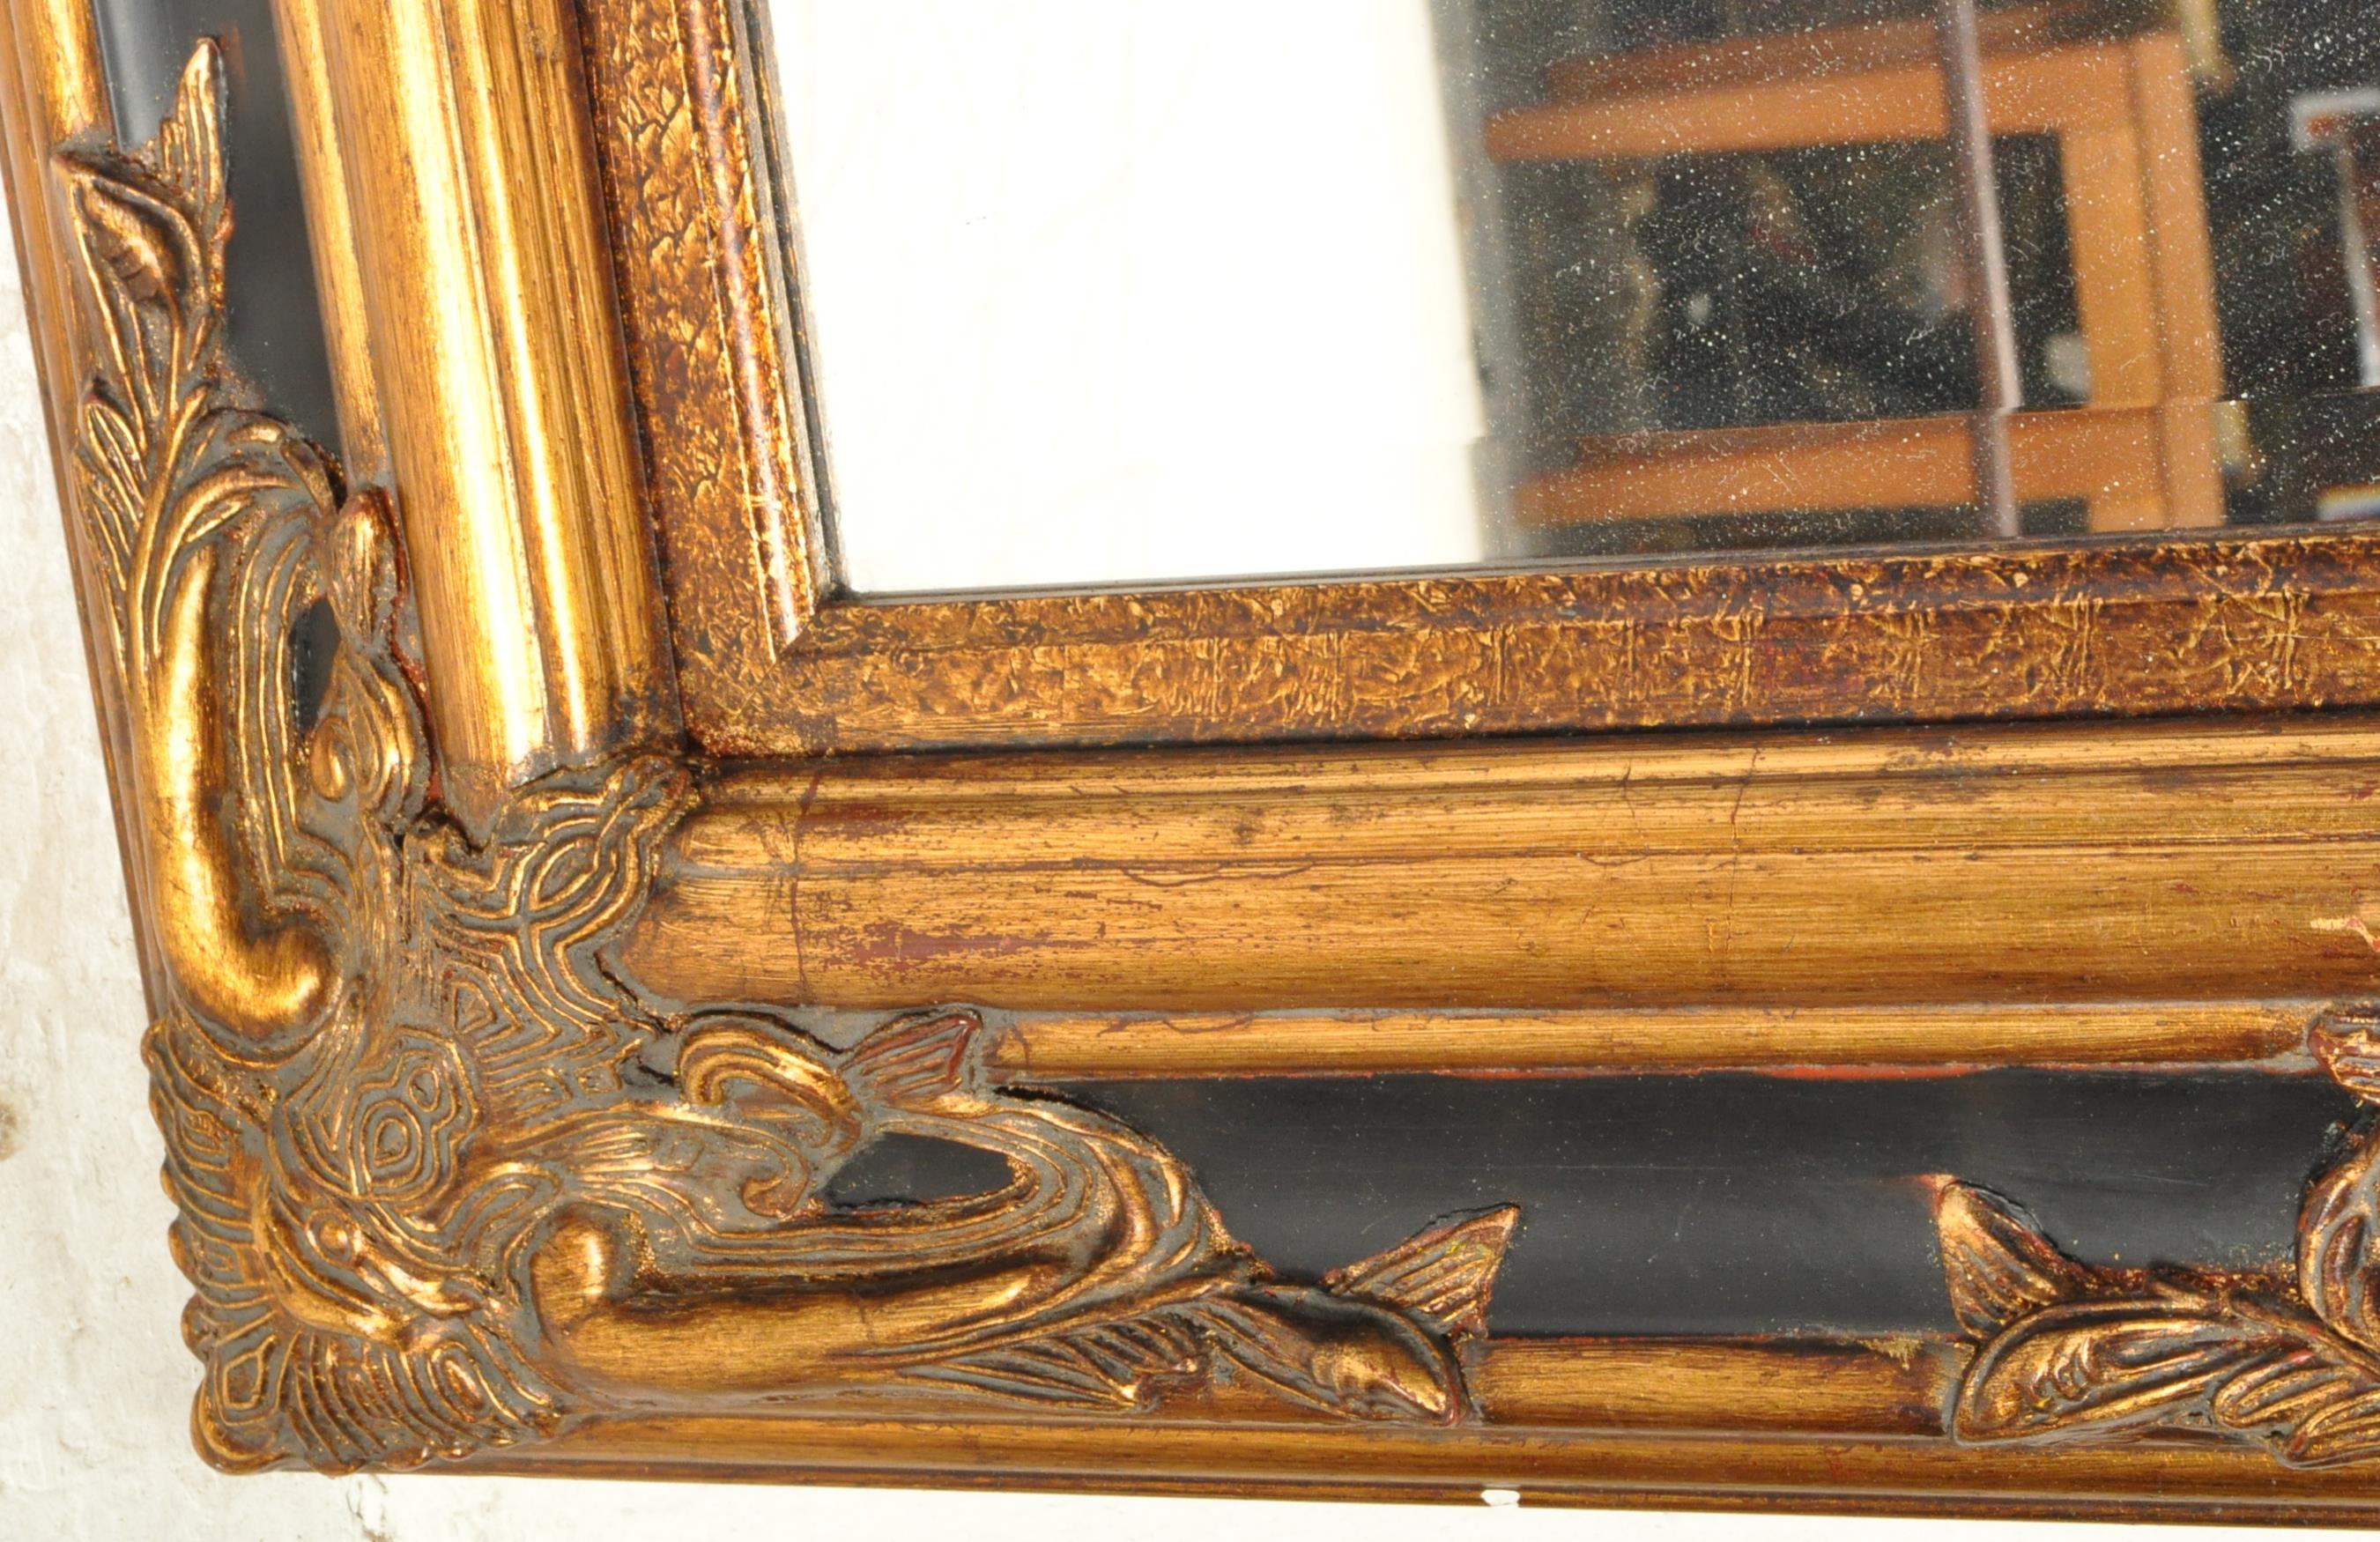 LARGE CONTEMPORARY BAROQUE REVIVAL WALL MIRROR - Image 4 of 5